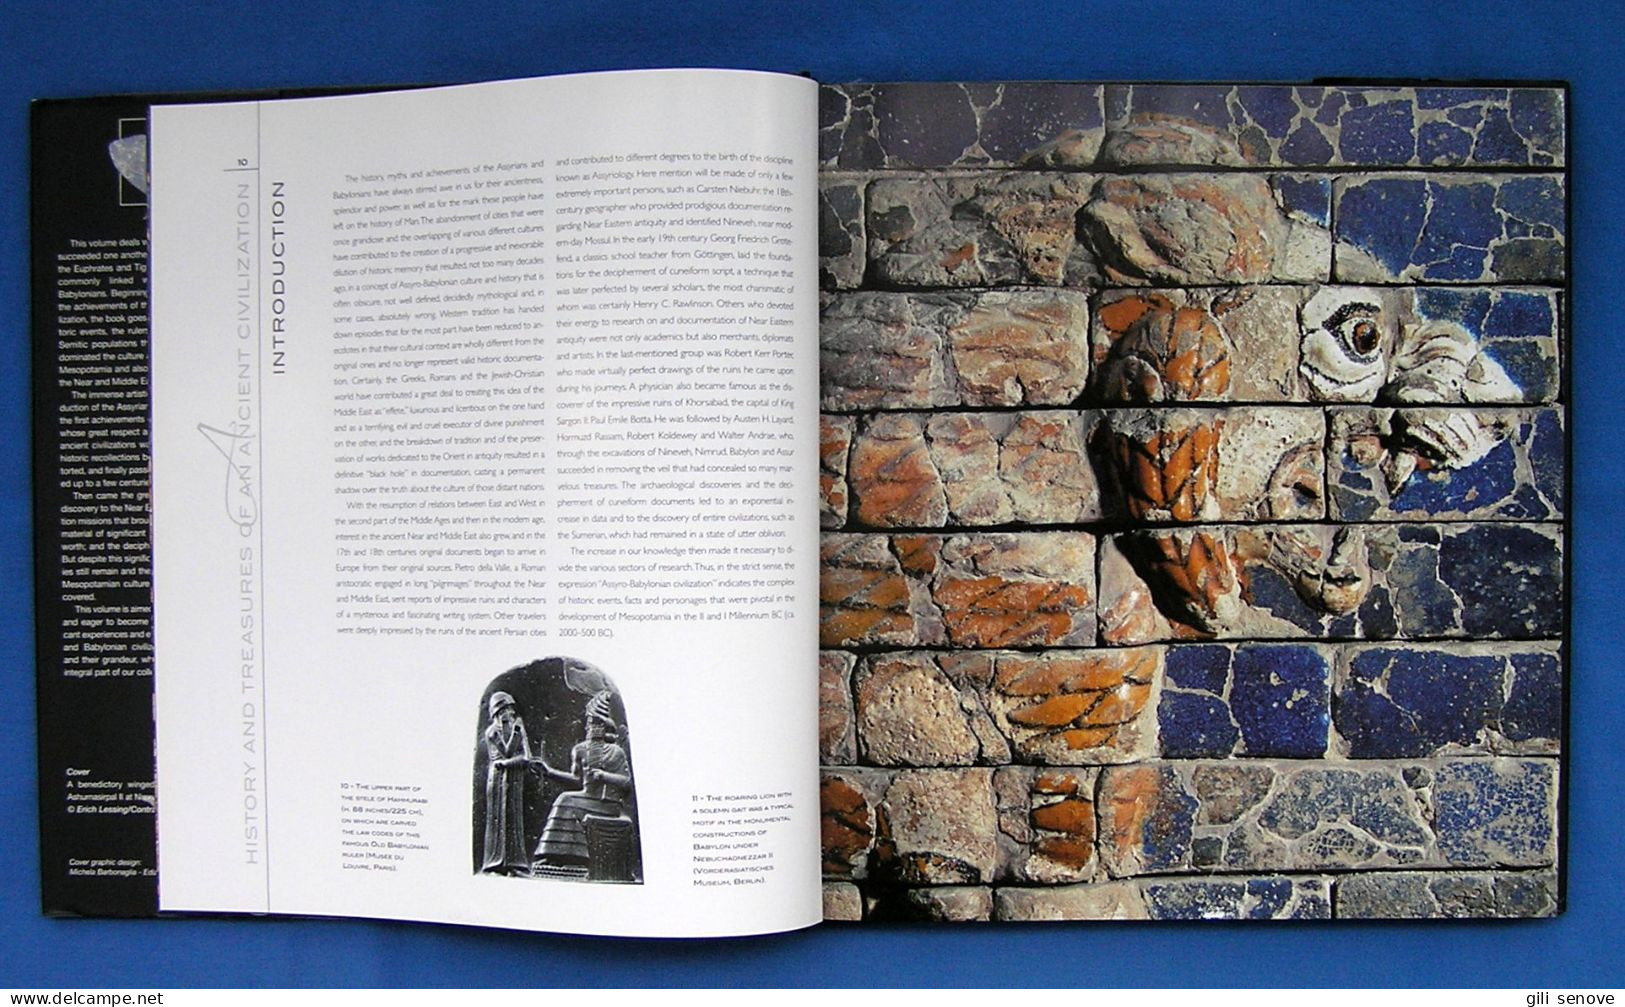 The Assyrians And The Babylonians: History And Treasures Of An Ancient Civilization 2007 - Belle-Arti